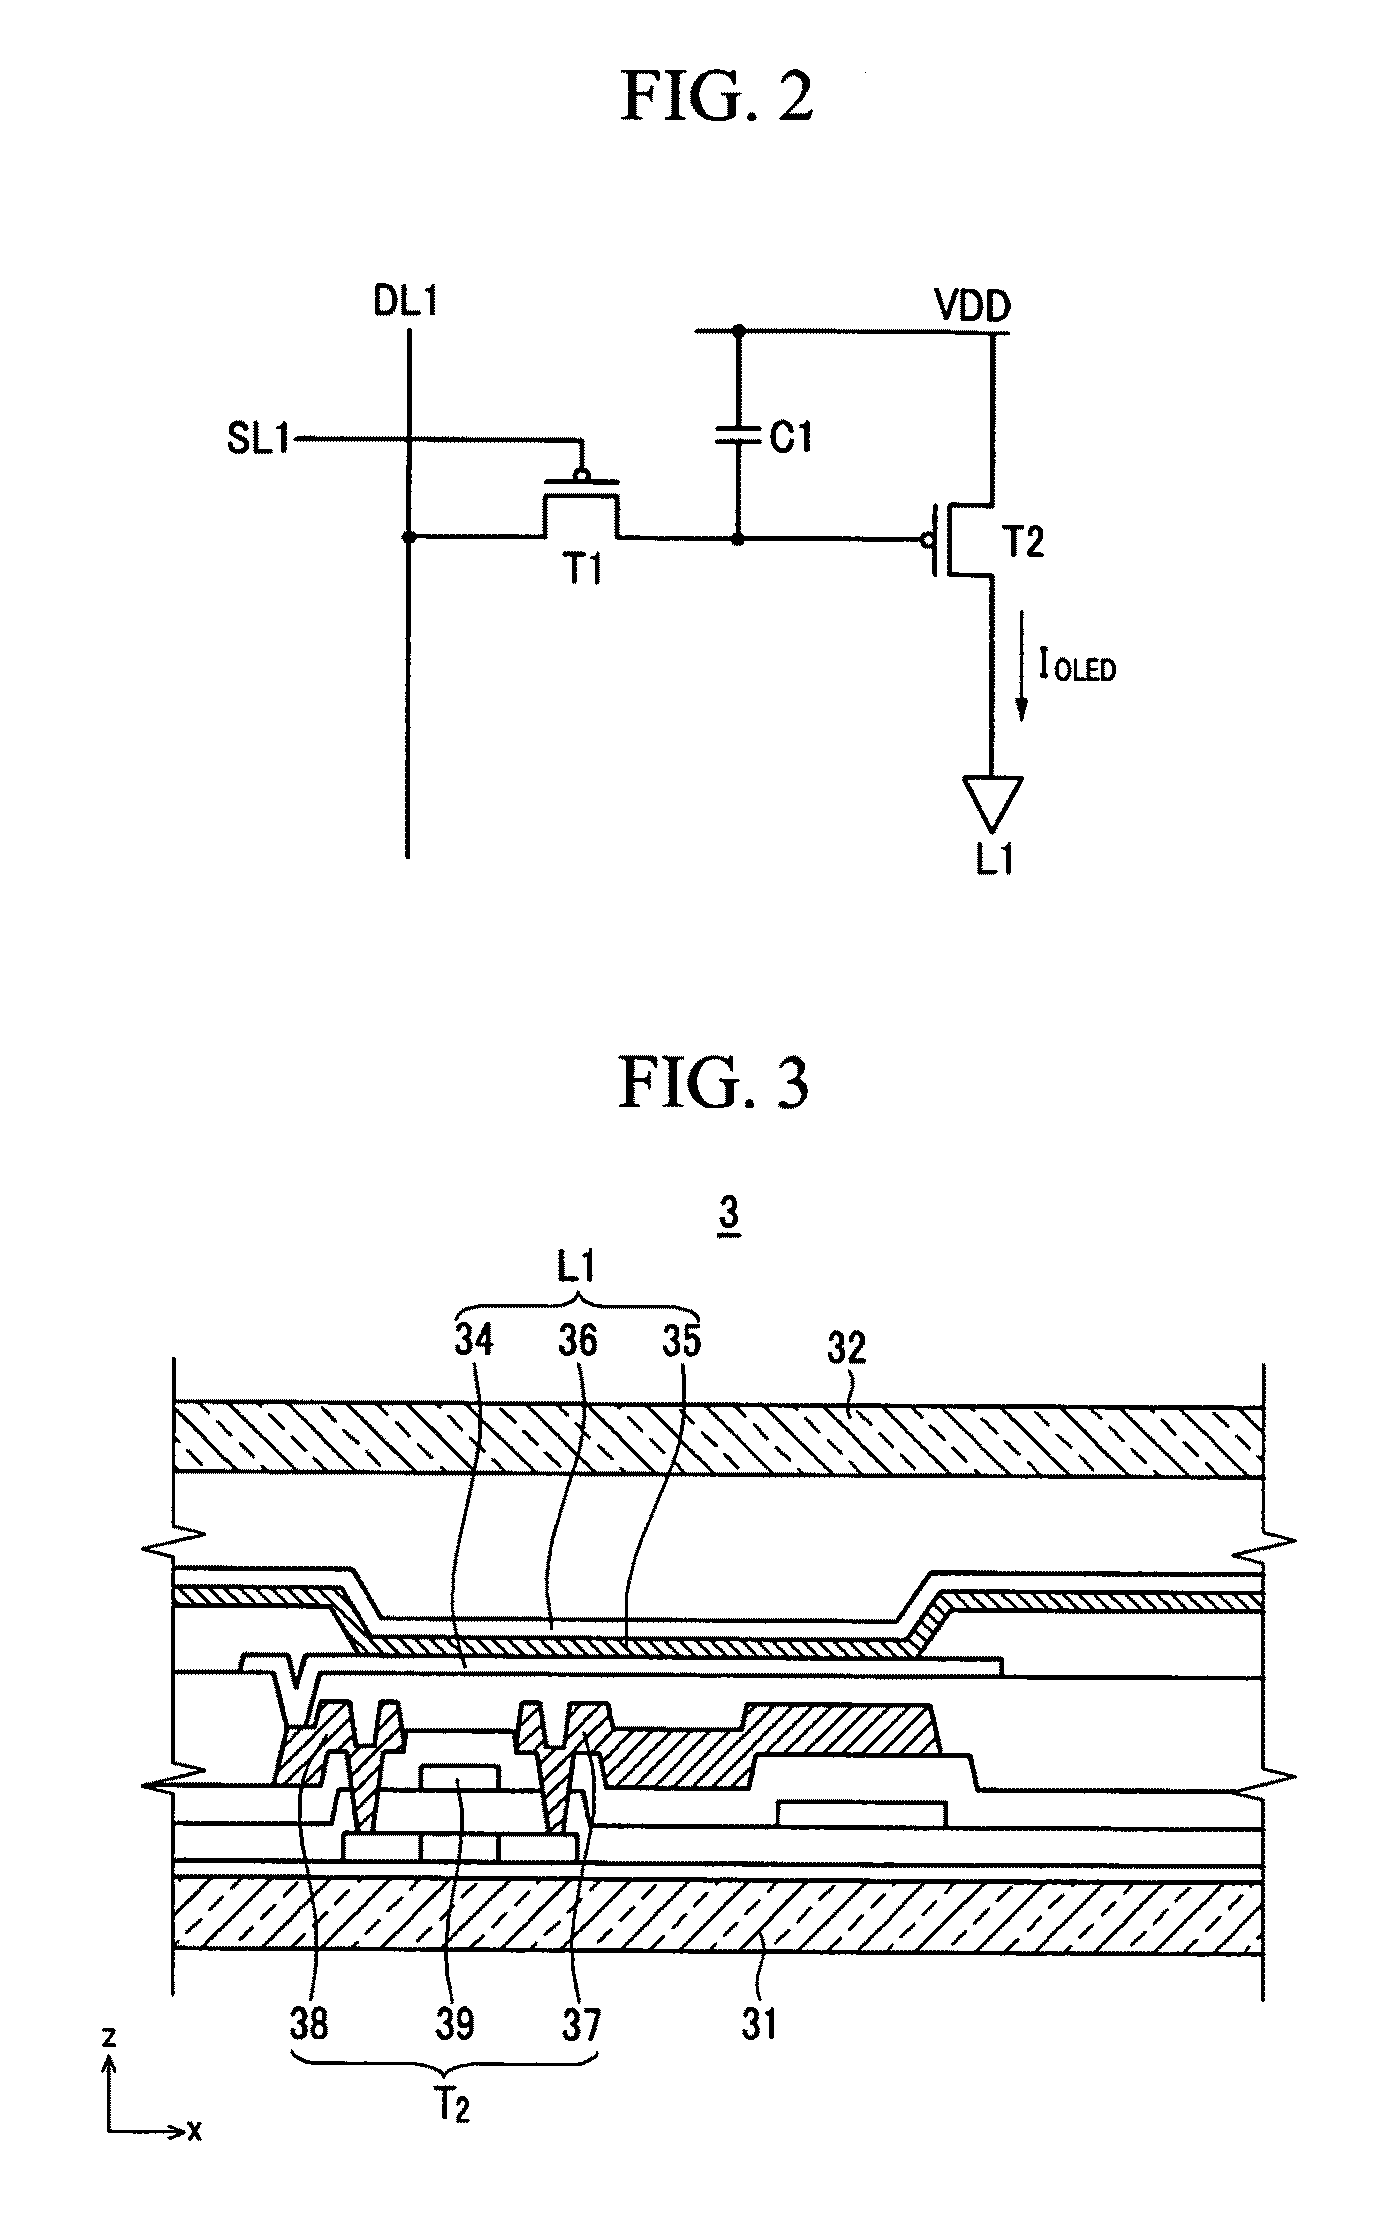 Mother substrate cutting apparatus, method of cutting a mother substrate using the same and organic light emitting diode display cut thereby